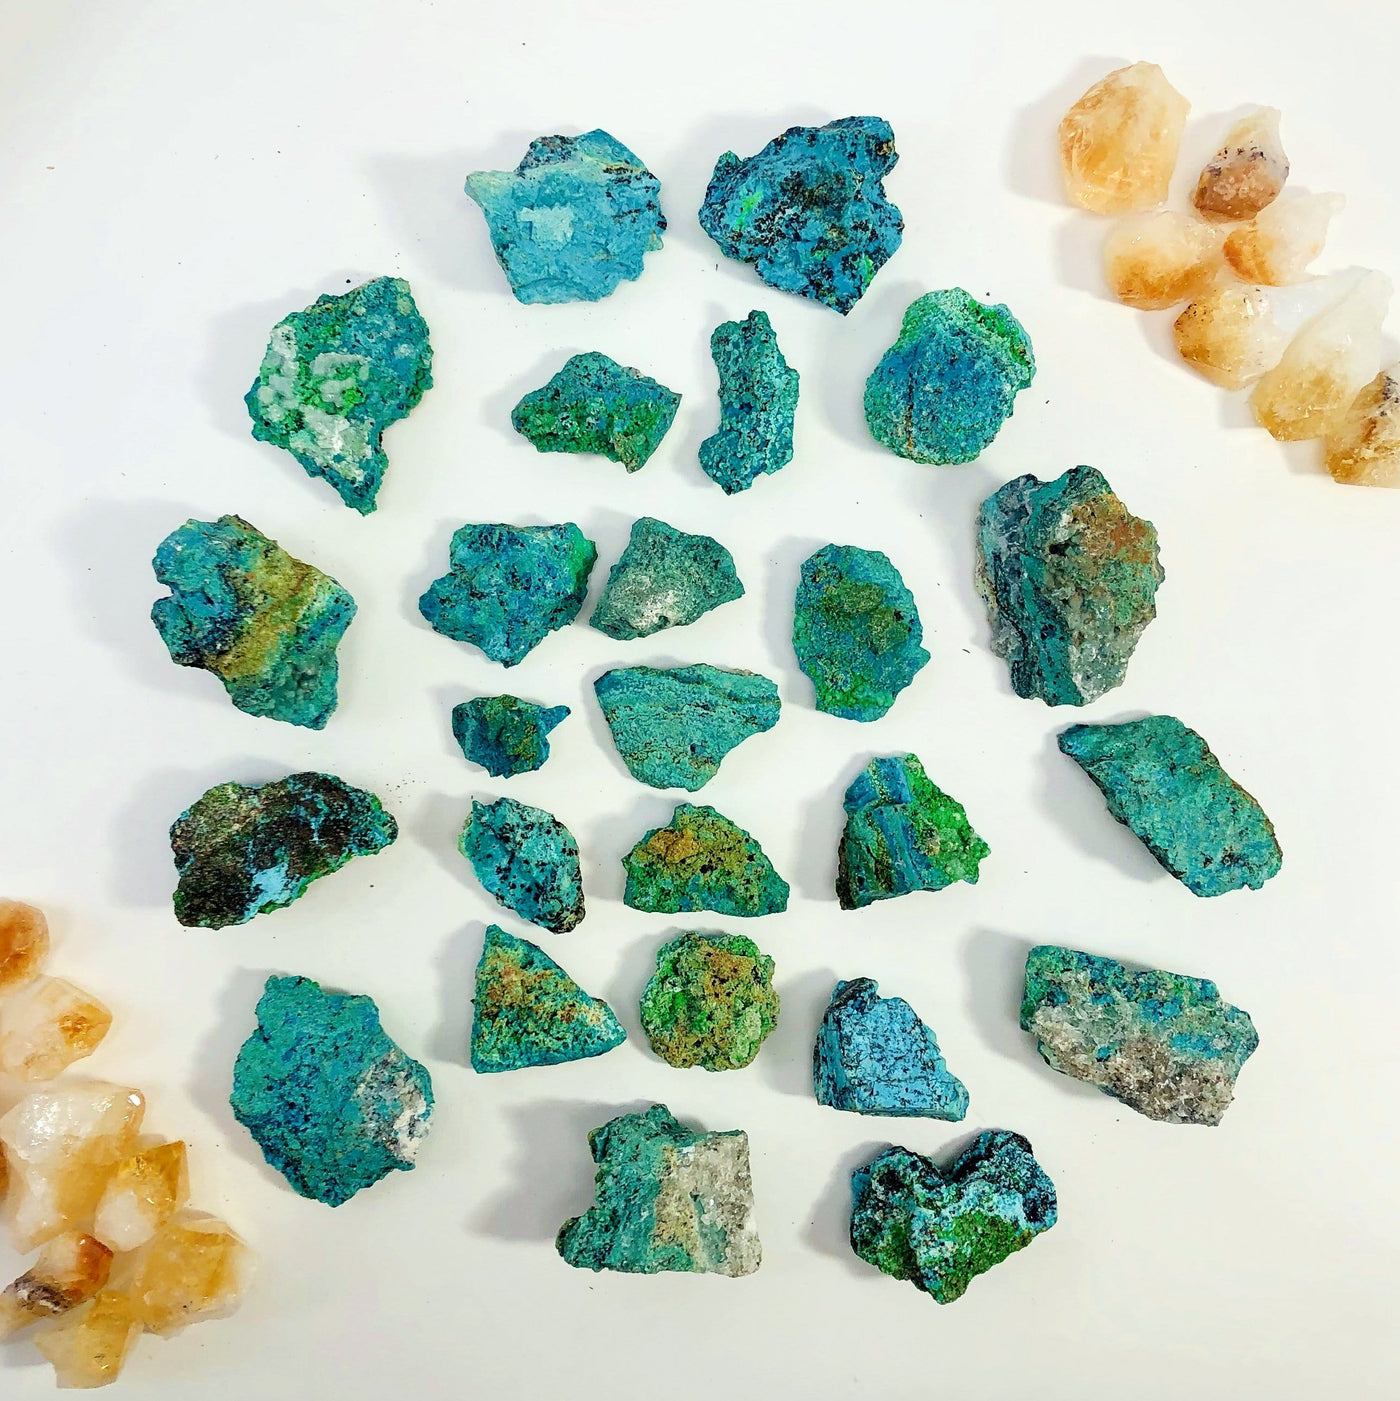 Many Azurite Mineral Stones spread out on a table showing colors, sizes and shapes